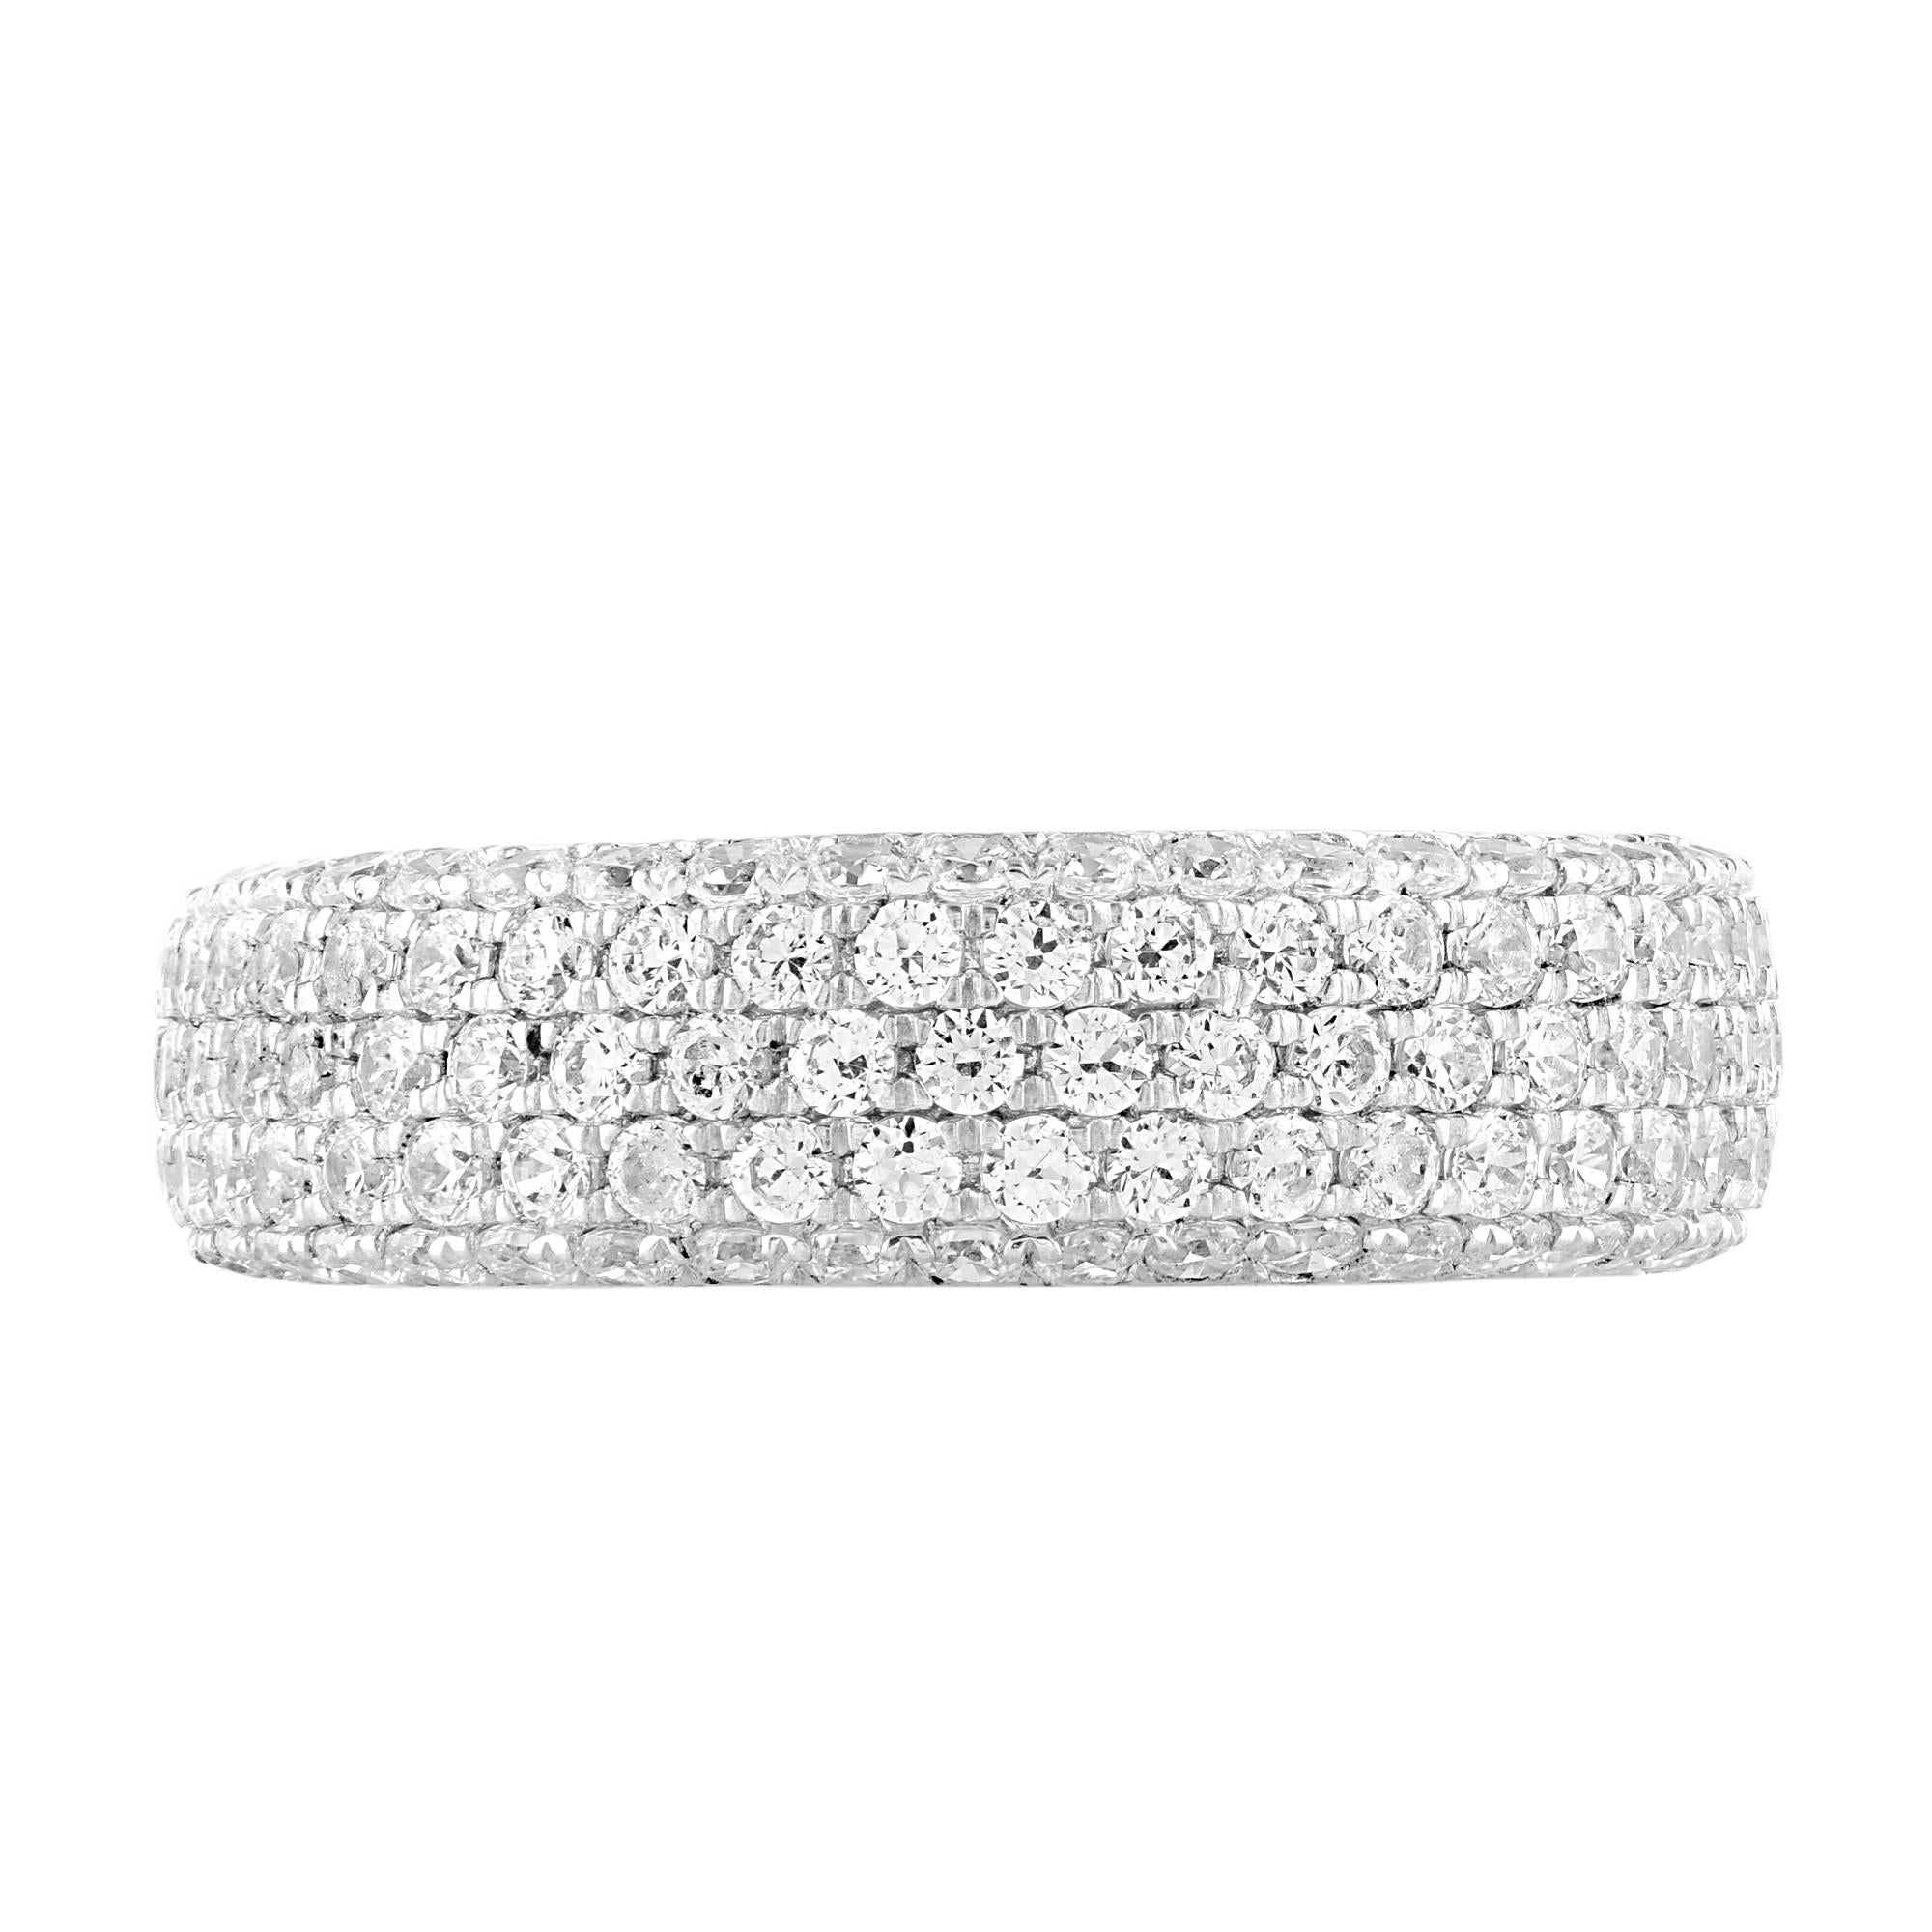 Honor the women you love with this eternity wedding band is expertly crafted in 14 Karat White Gold and features 200 round diamond set in microprong setting. This eternity band has high polish finish and is a valuable addition to any jewelry